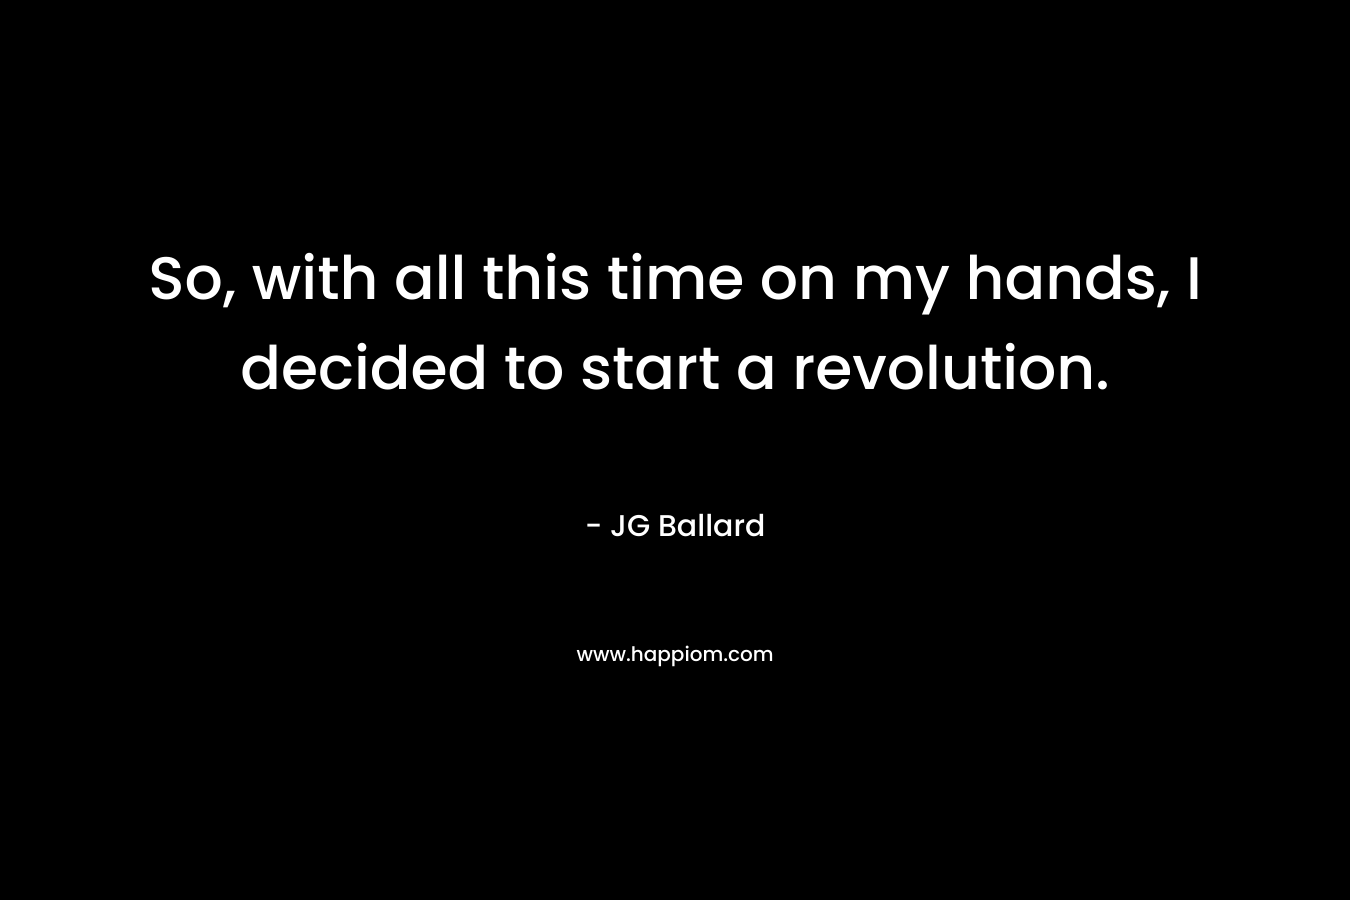 So, with all this time on my hands, I decided to start a revolution. – JG Ballard